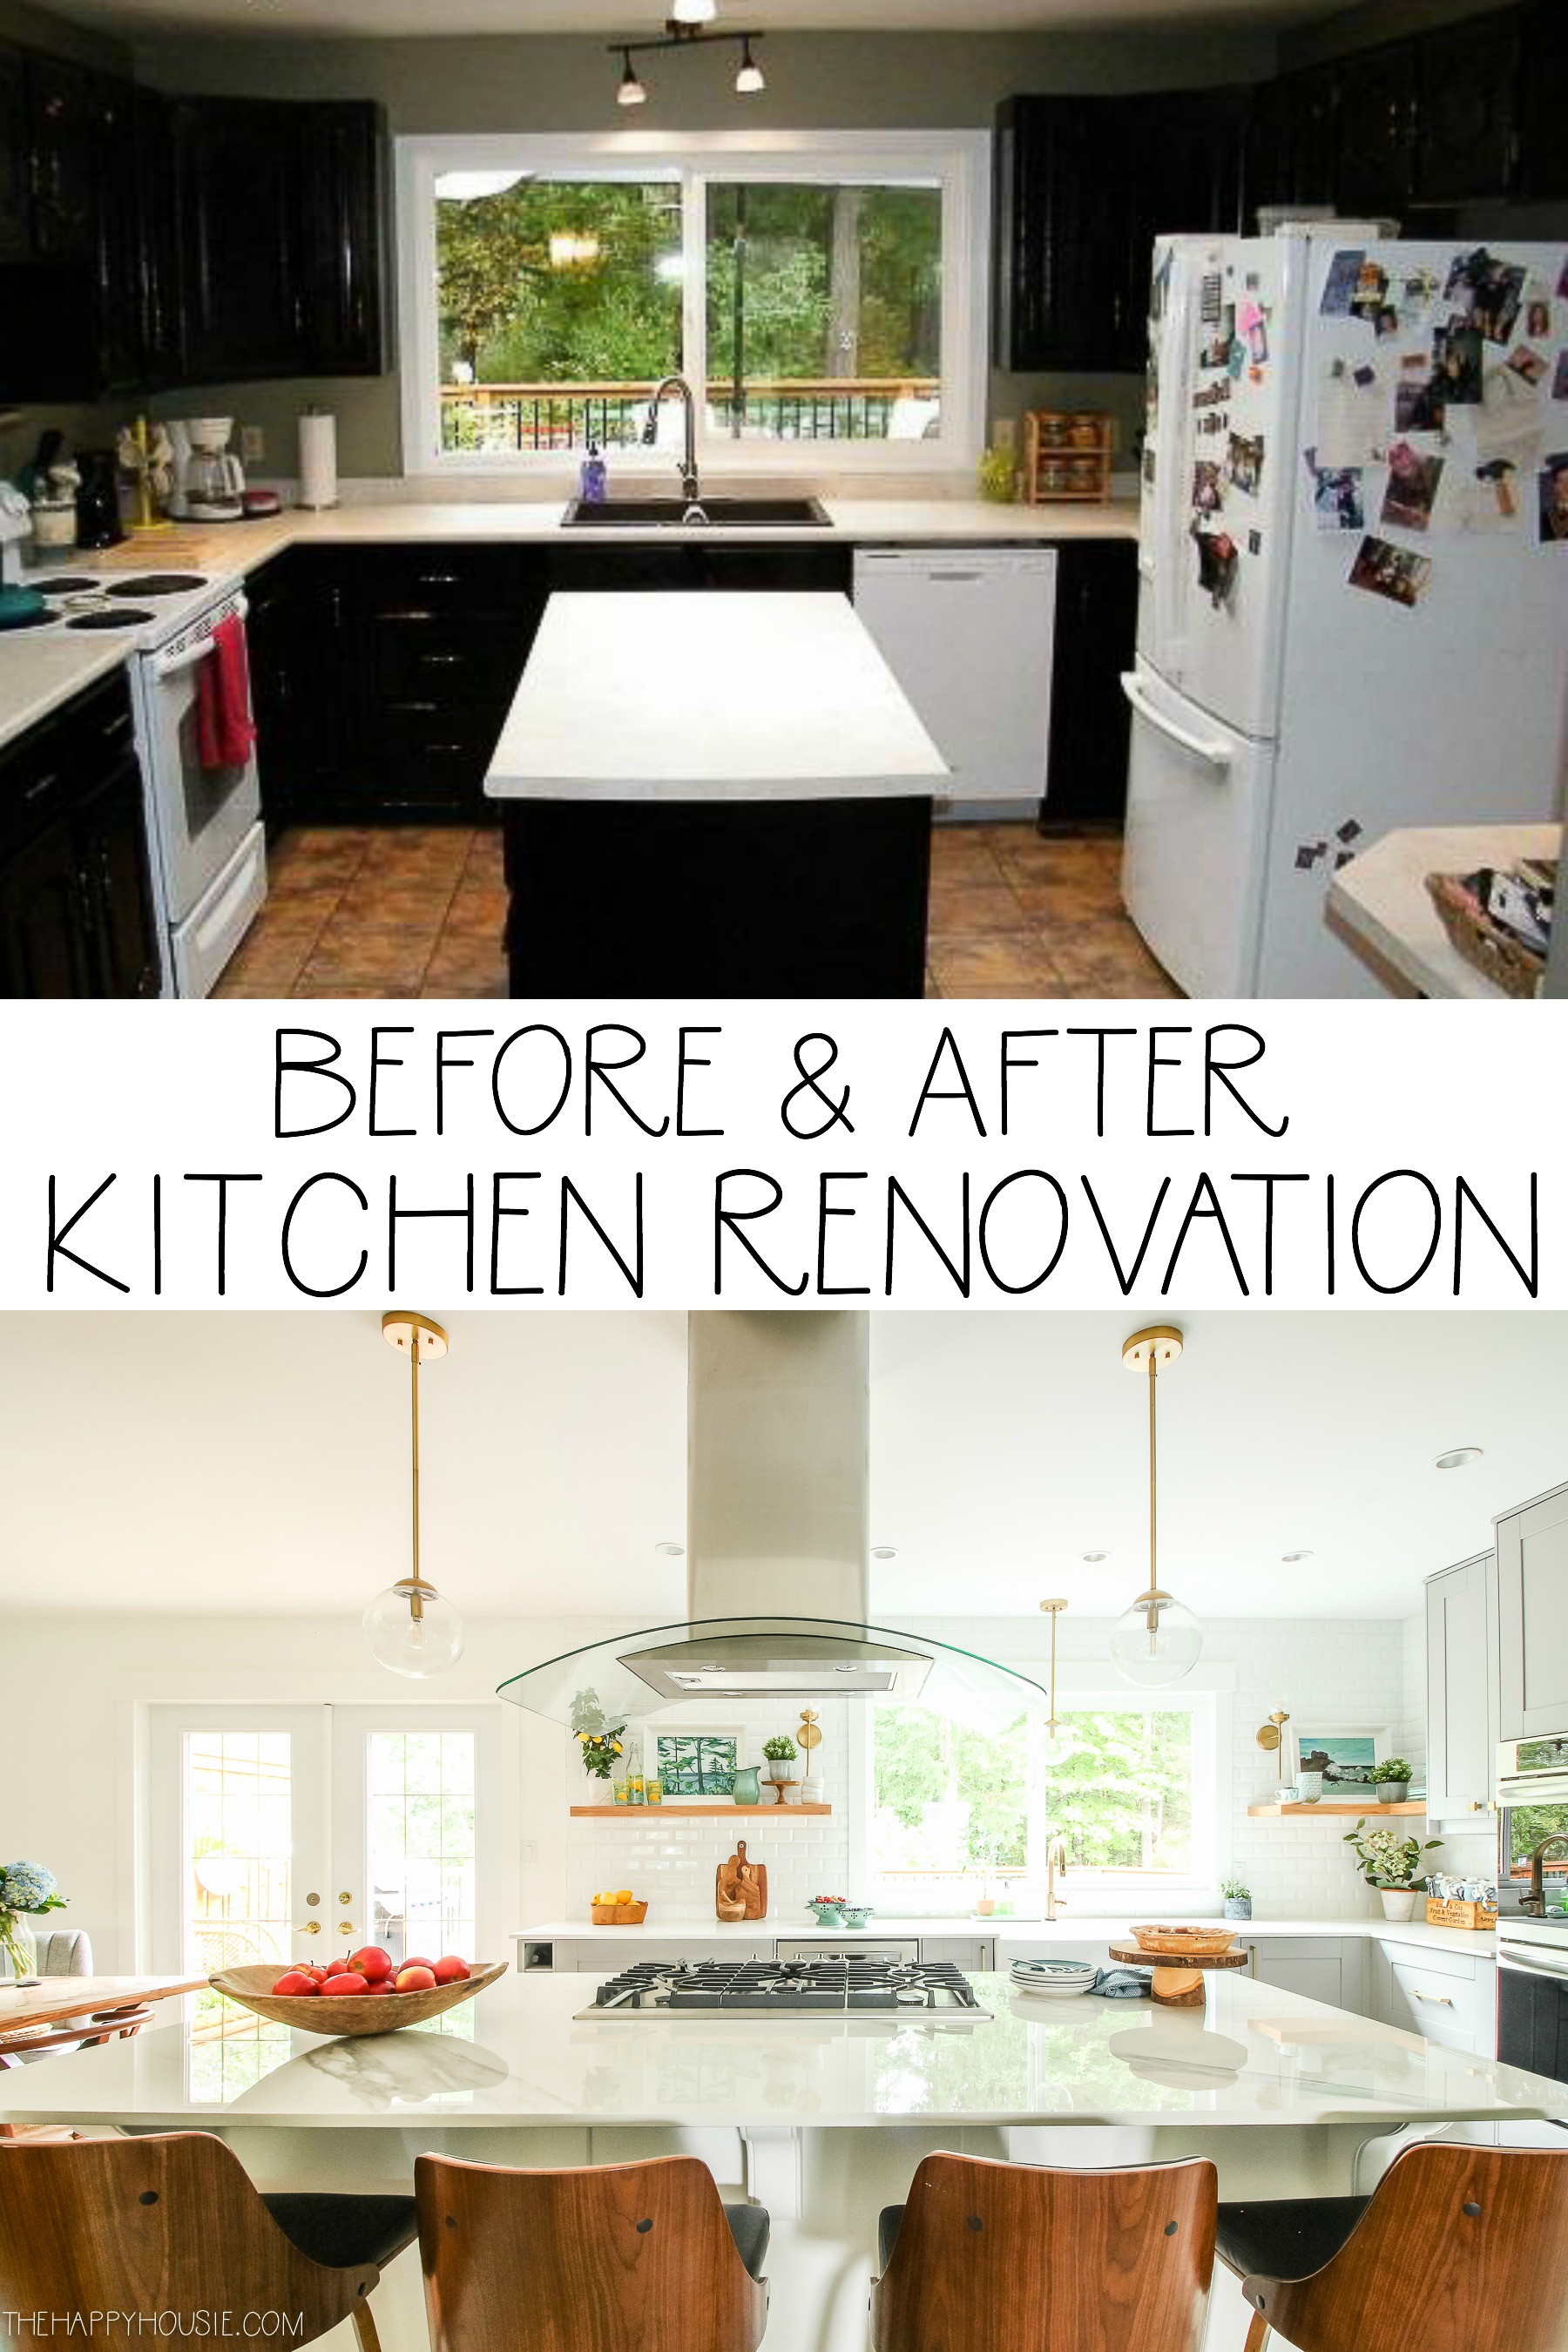 Before & After Kitchen Renovation graphic.